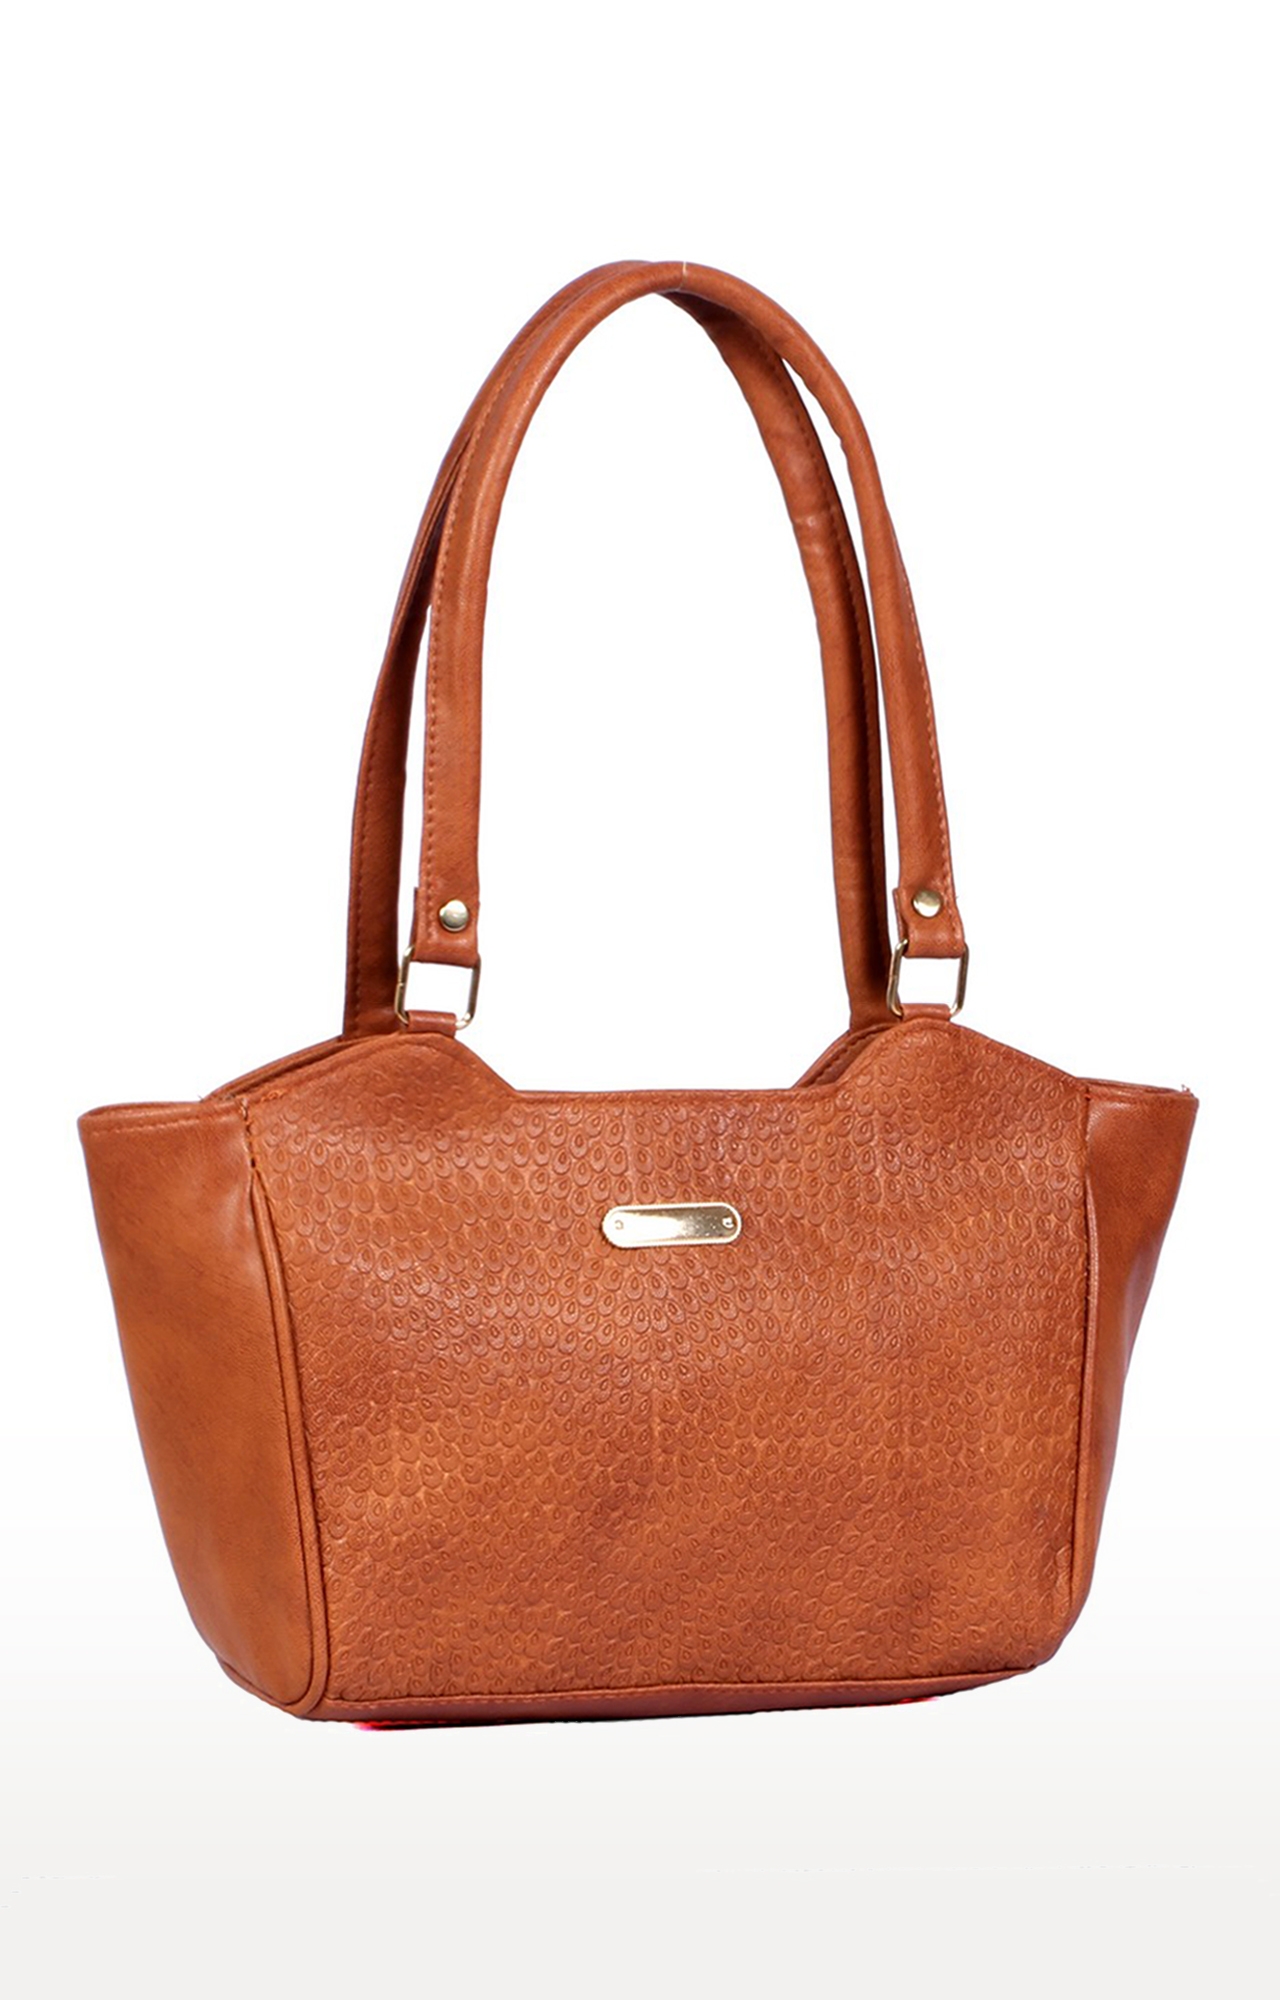 EMM | Lely's Beautiful Women's Handbag With Latest Shades -Brown 2